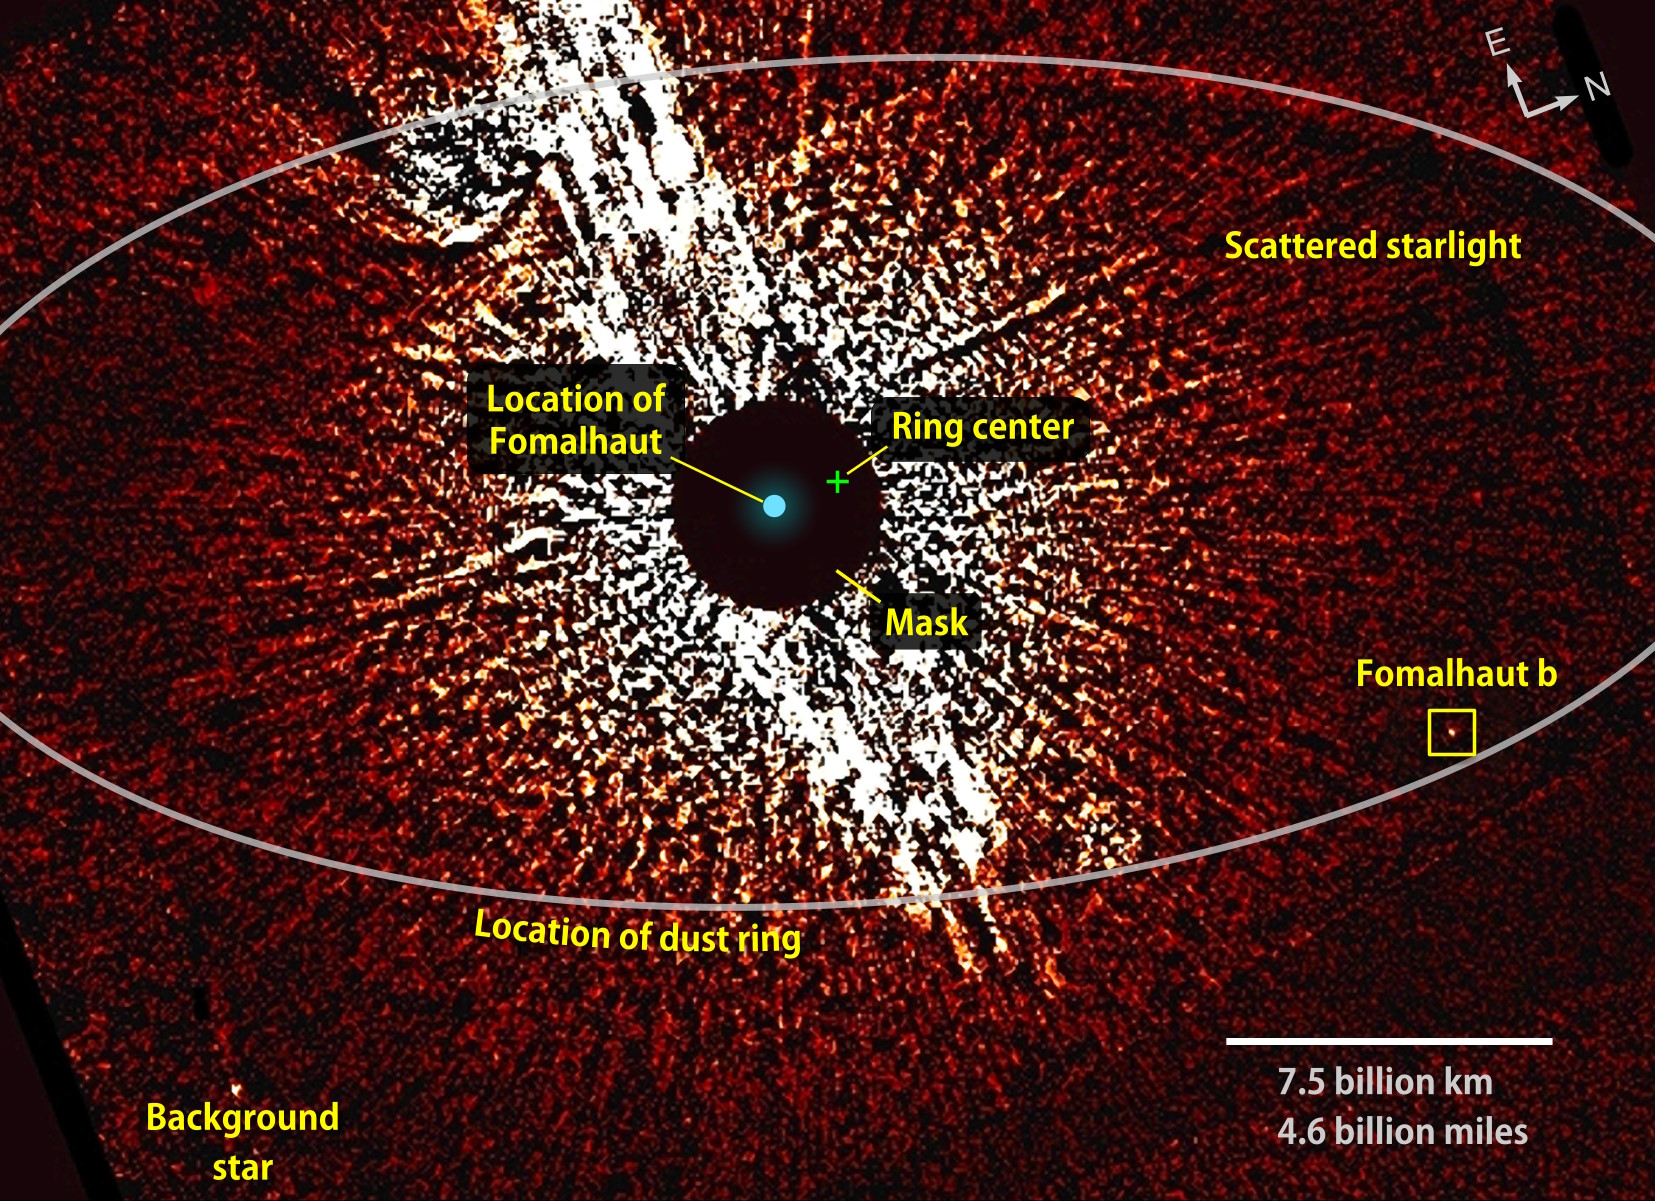 Visible light Hubble image showing Fomalhaut and surrounding area